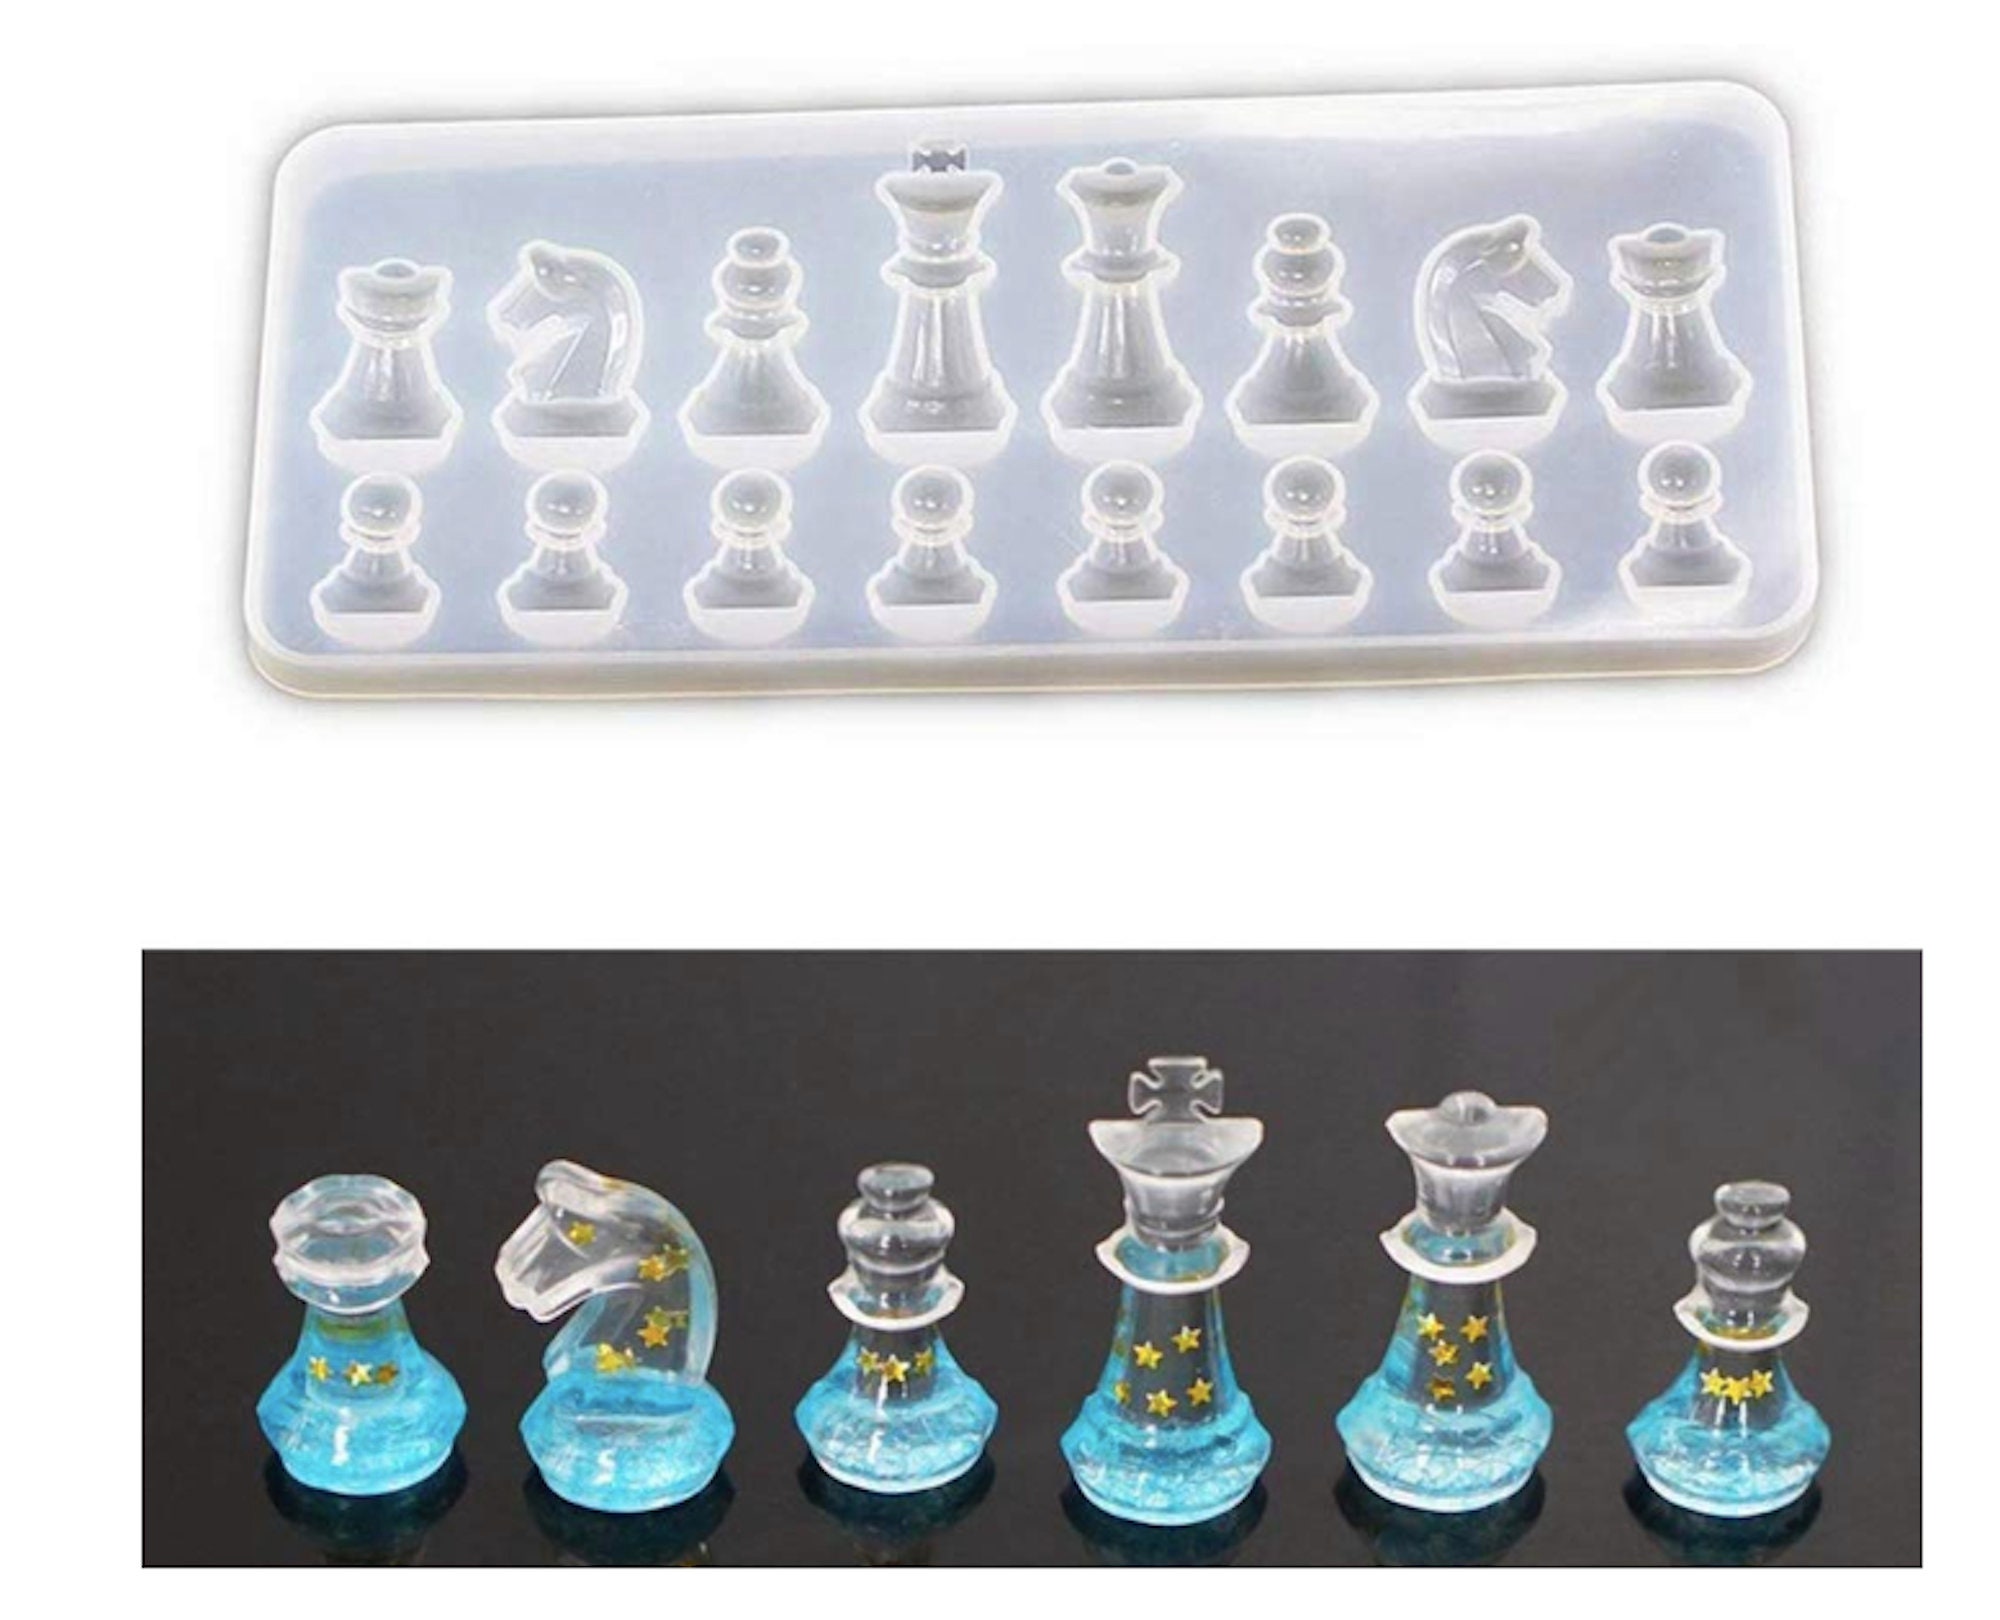 Chess Pieces Mold - Rook, Bishop & Knight - Tomric Systems, Inc.